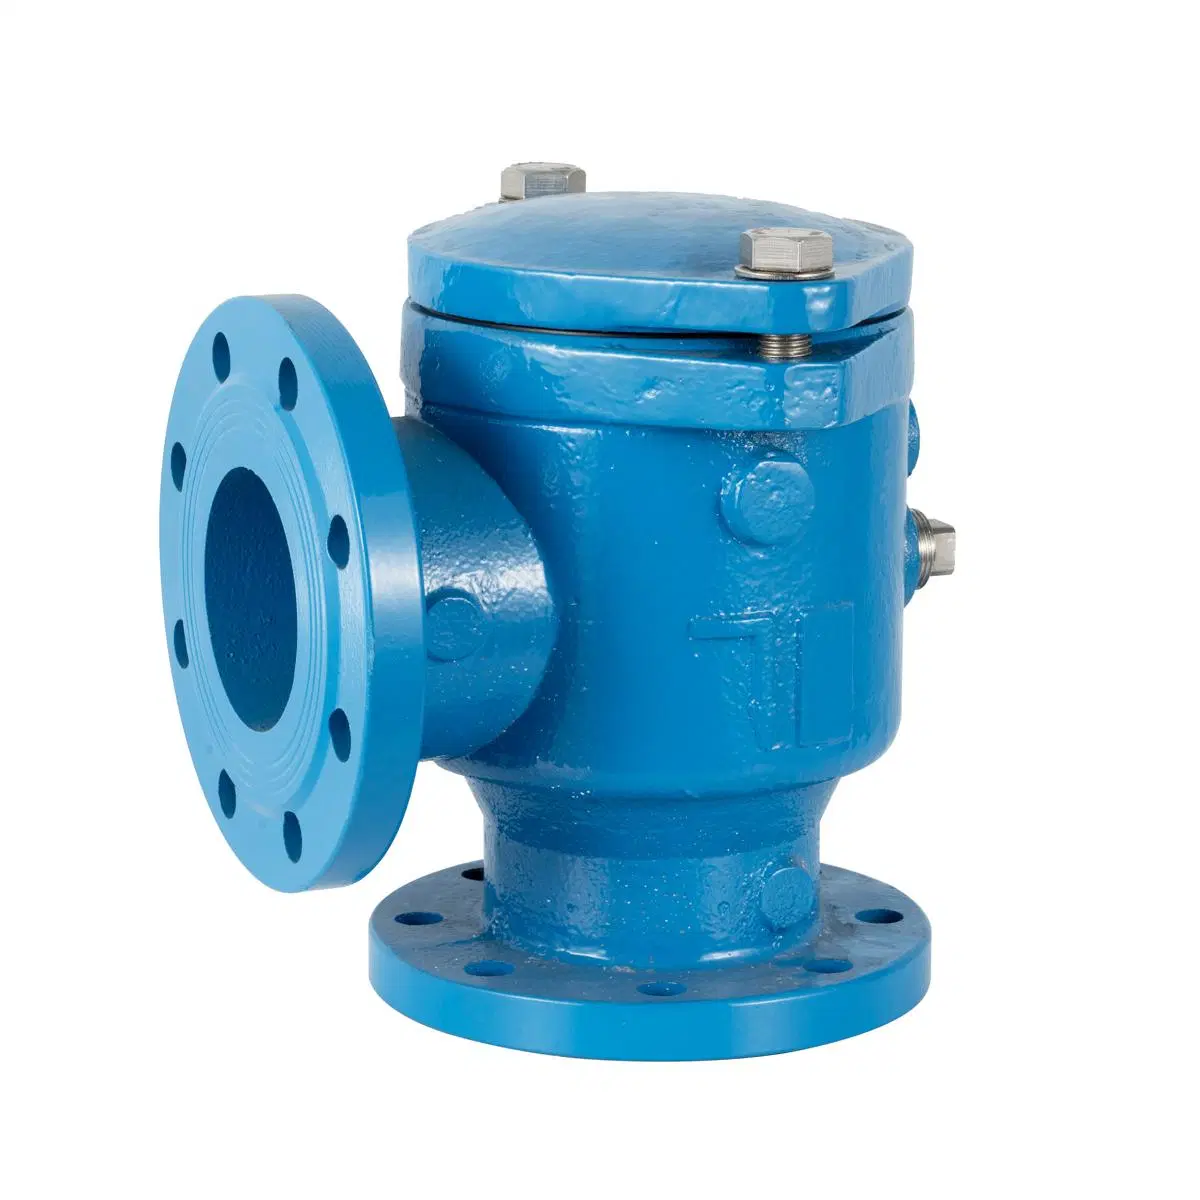 Strainer Filter Valve DN50-DN400 Class125 Class150 Pn10 Pn16 Pn25 Flange End Flow Valve for Water Pump Use Stainless Steel Ductile Cast Iron Suction Diffusers